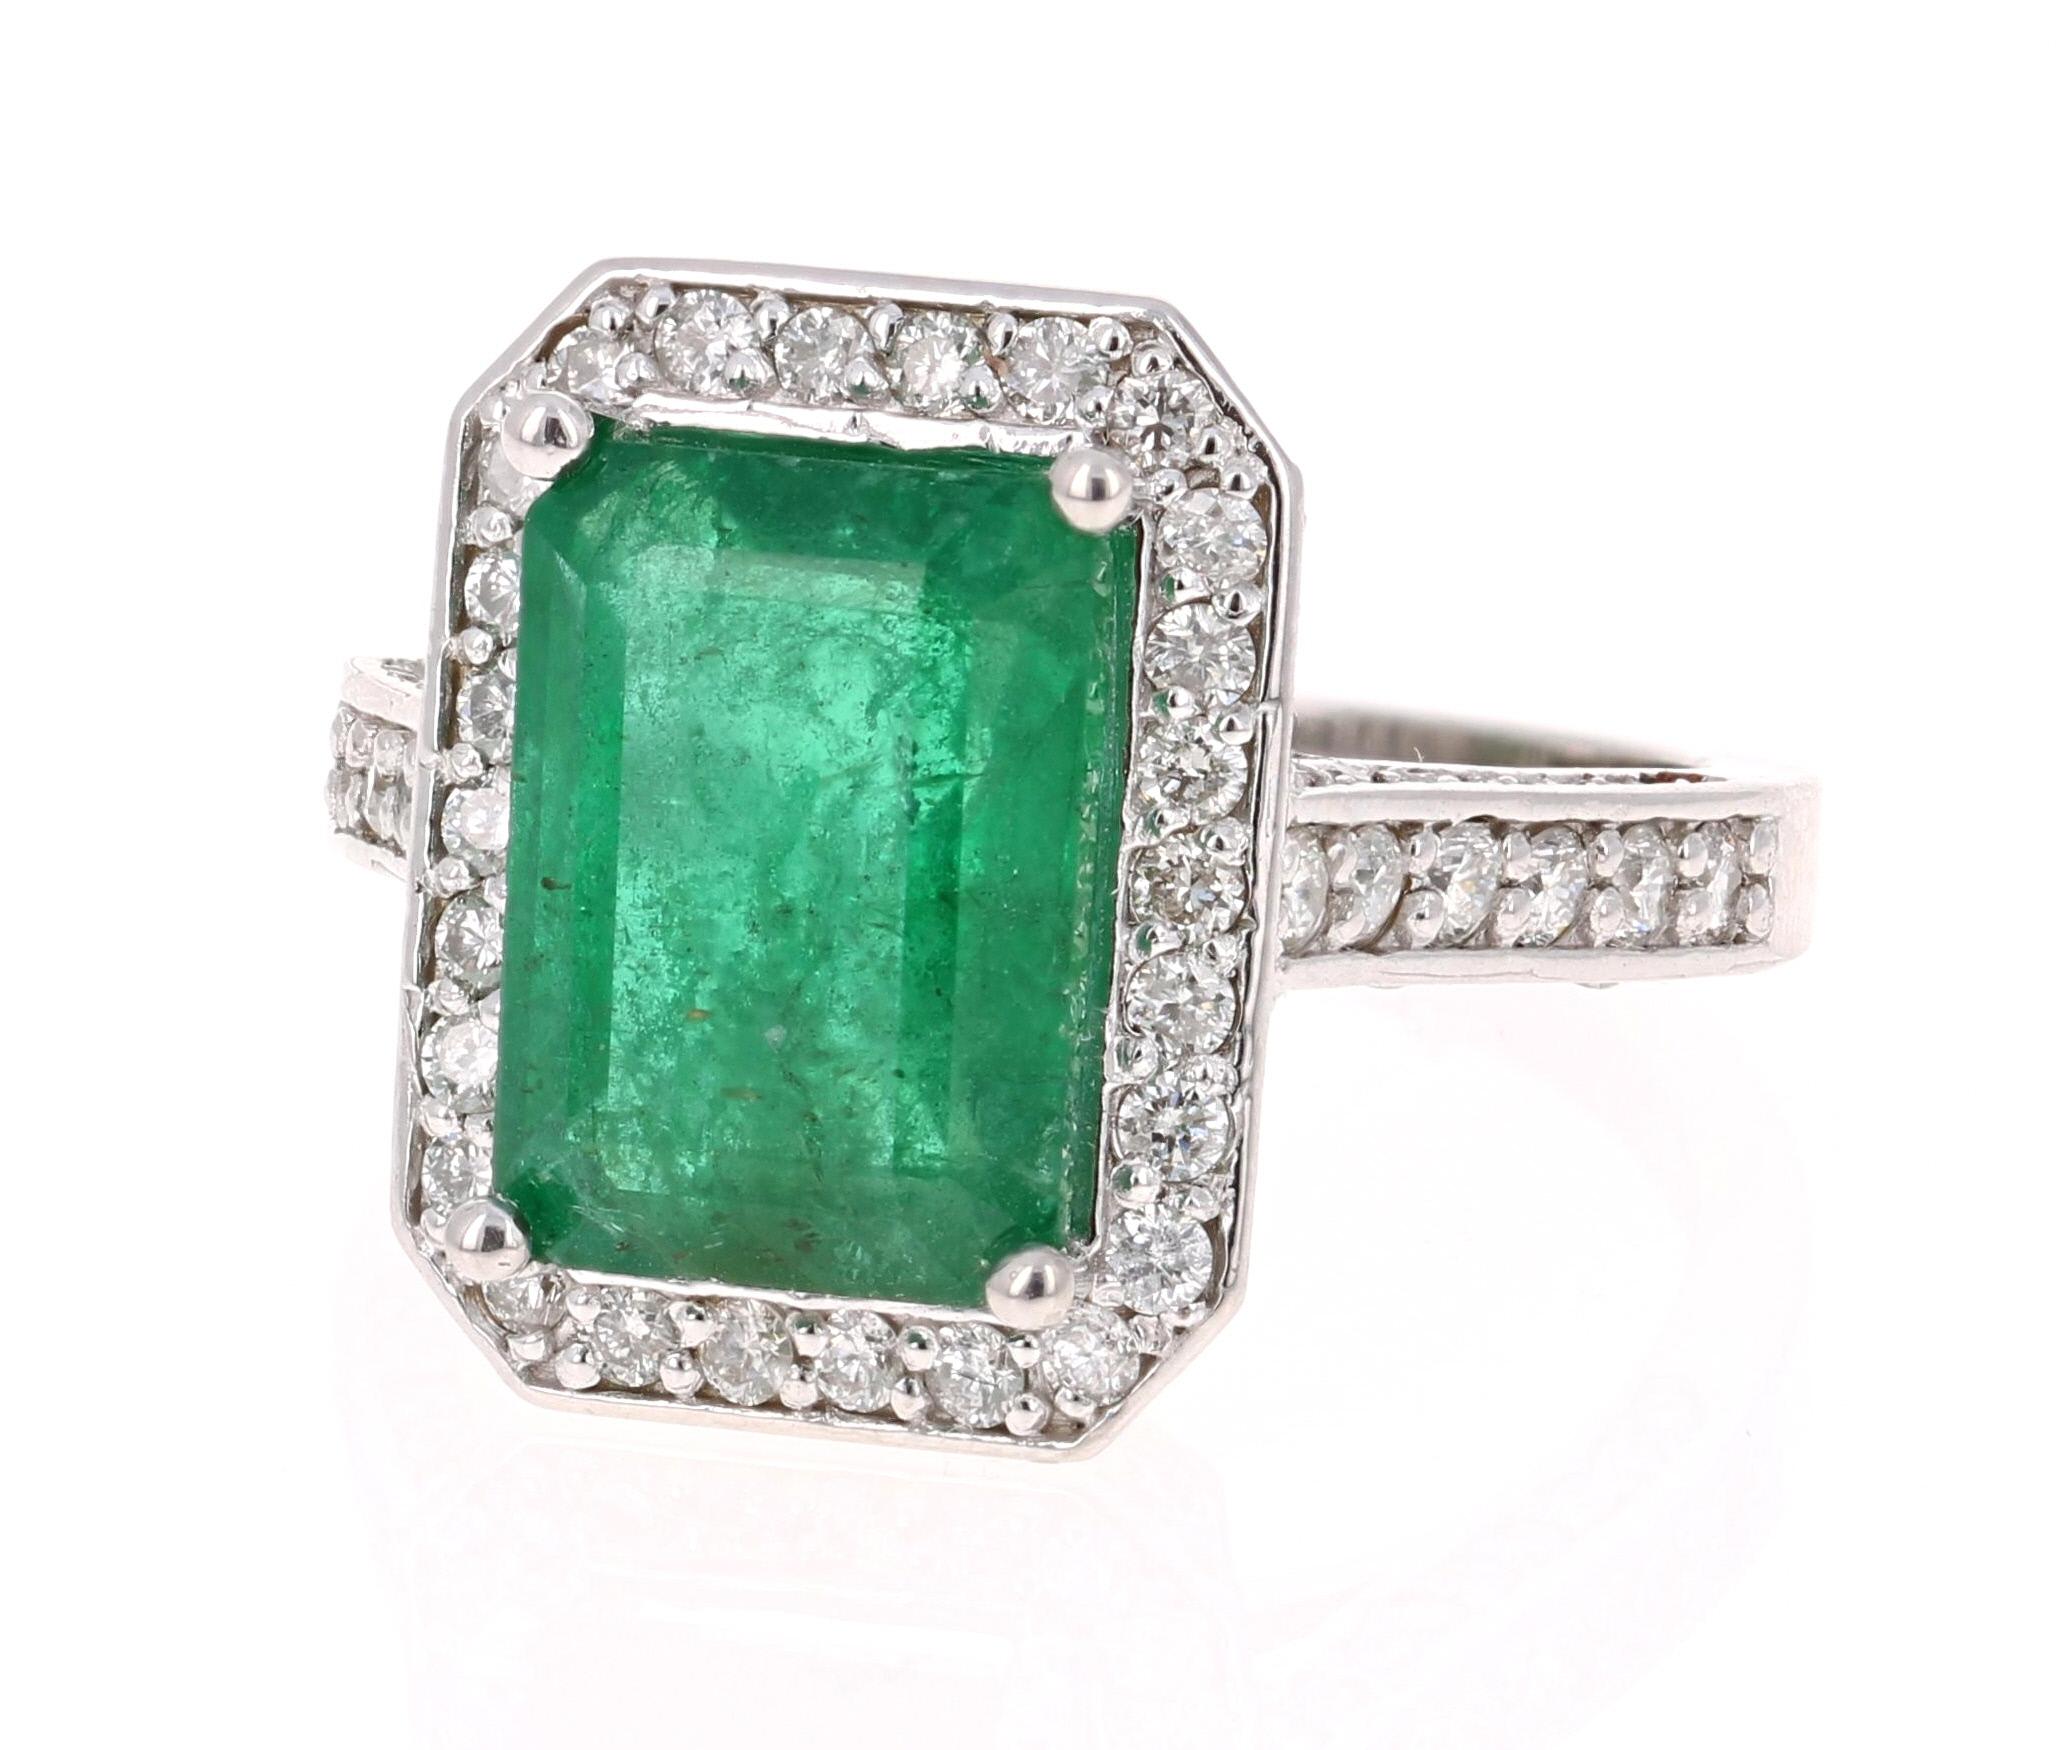 A beautiful classic vintage-looking setting holding a magnificent natural Emerald that weighs 4.11 carats.  

The measurements of the Emerald are 8mm x 11.5 mm and the face of the ring is approximately 16 mm x 12 mm. This gorgeous ring also has 120